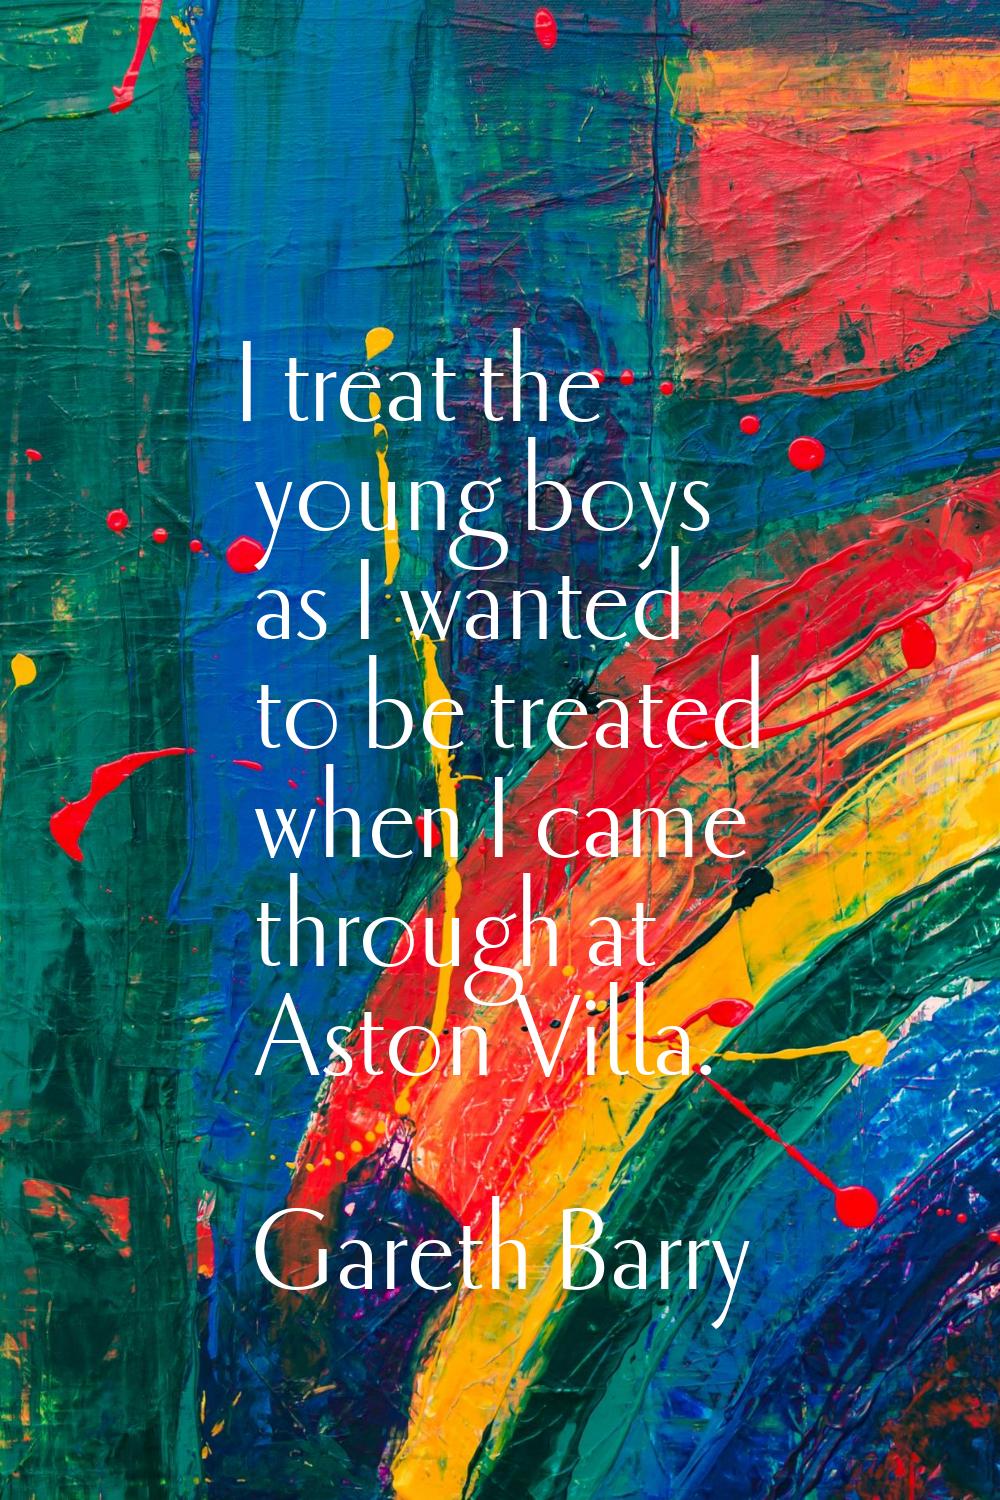 I treat the young boys as I wanted to be treated when I came through at Aston Villa.